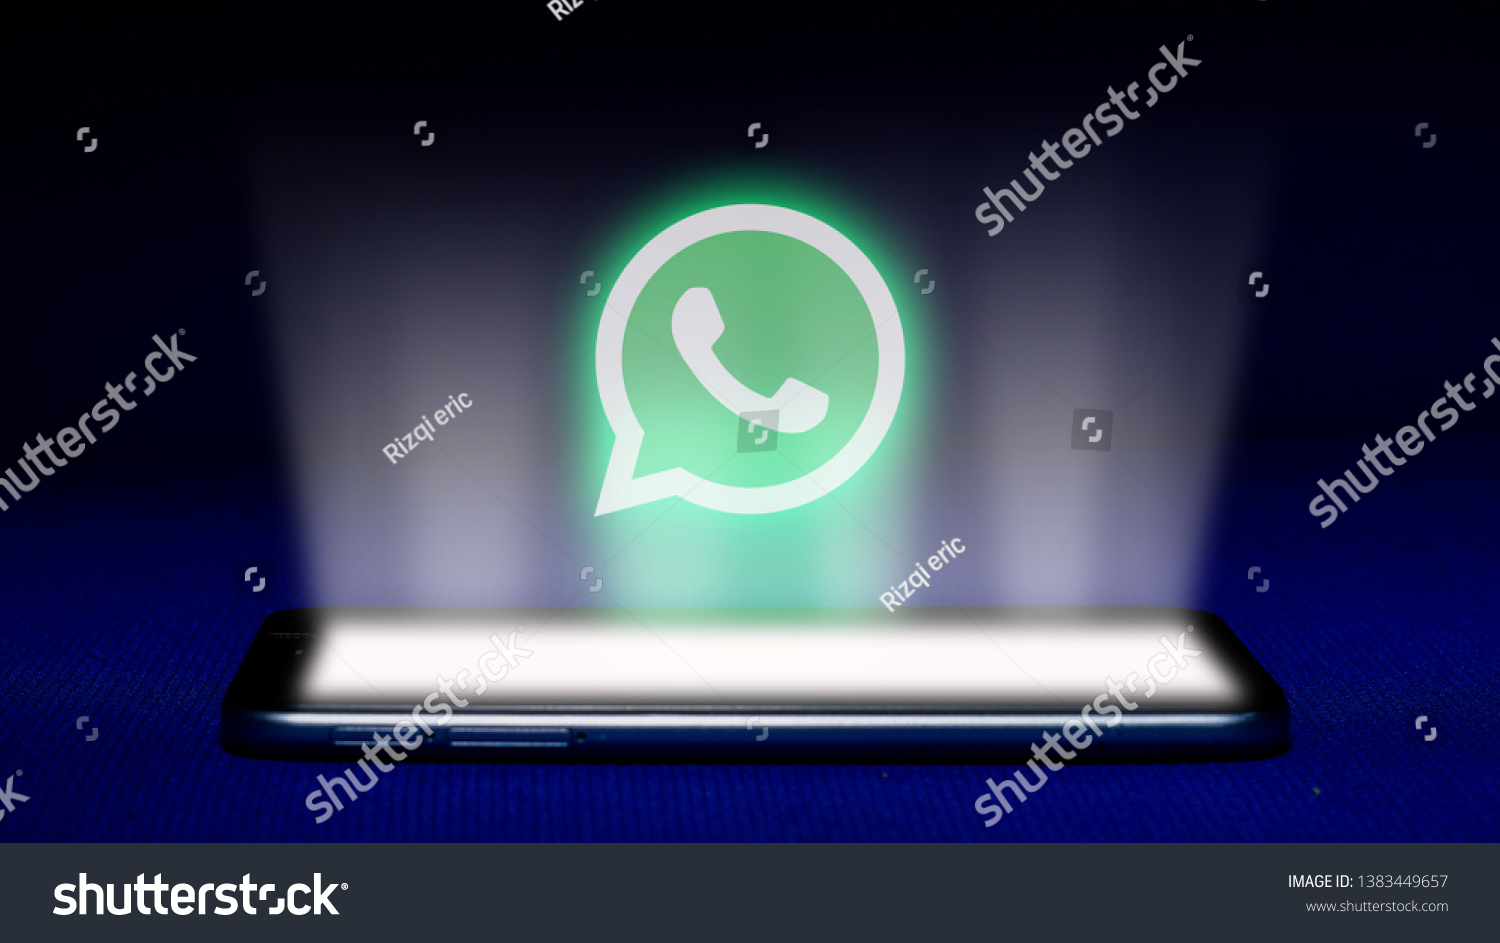 Magelang, Central Java, Indonesia, April 29, 2019.Hologram of whatsapp logo. hologram whatsapp logo image on blue background . The concept of next technology,social media, - Image #1383449657